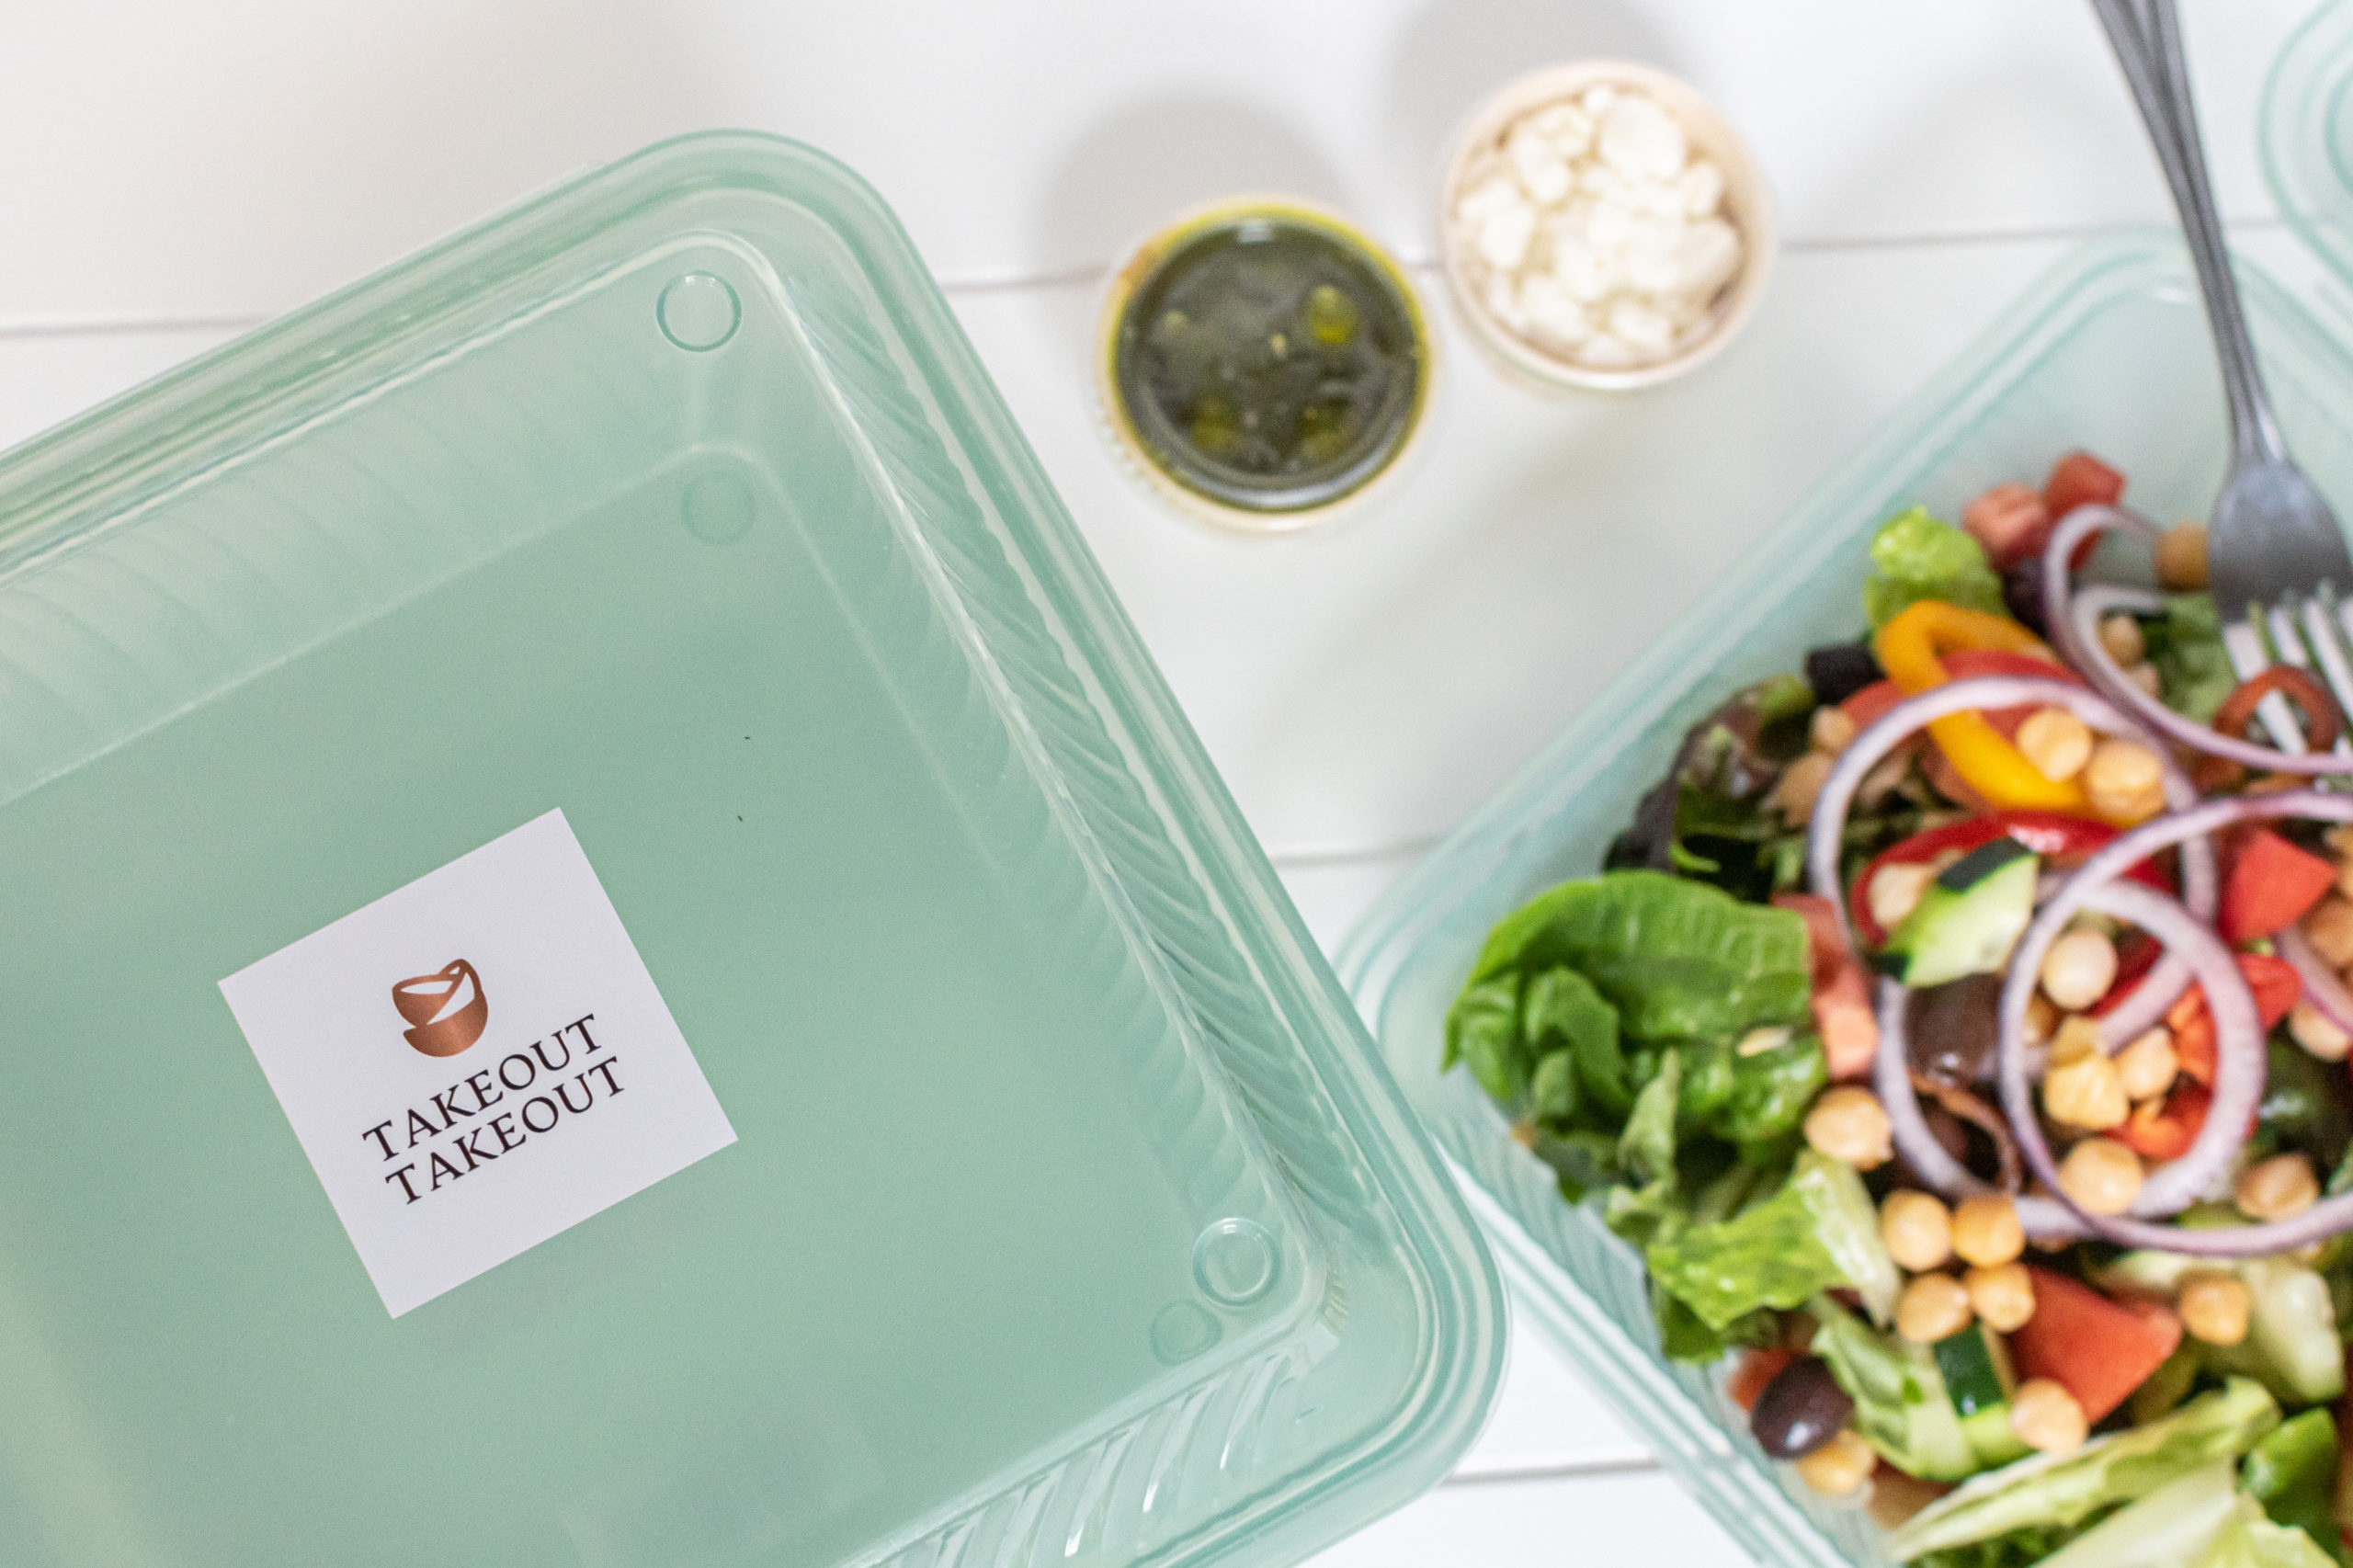 Image of to-go box that can be rented from Takeout Takeout